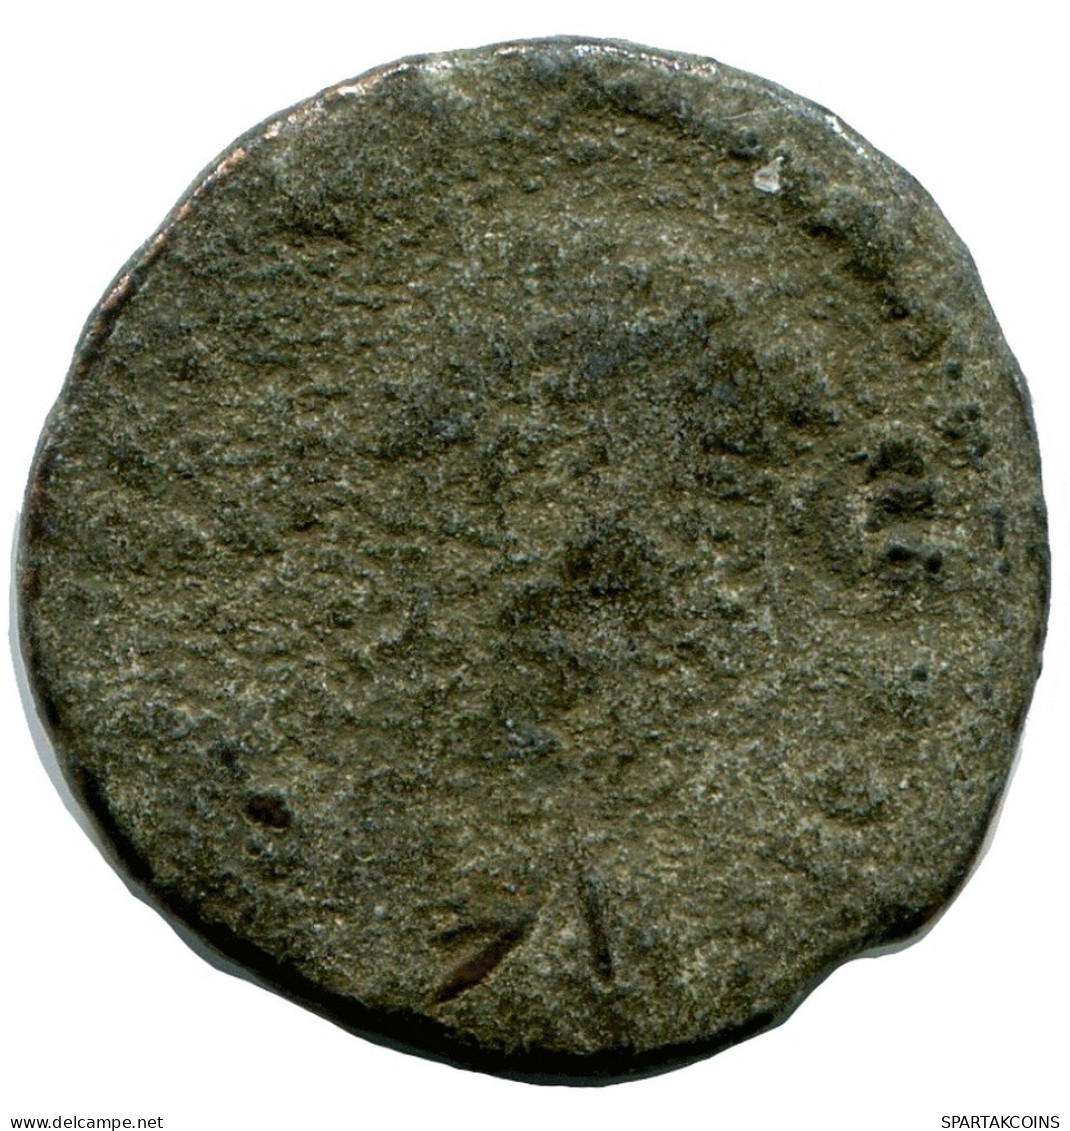 ROMAN Coin MINTED IN ALEKSANDRIA FROM THE ROYAL ONTARIO MUSEUM #ANC10186.14.D.A - L'Empire Chrétien (307 à 363)